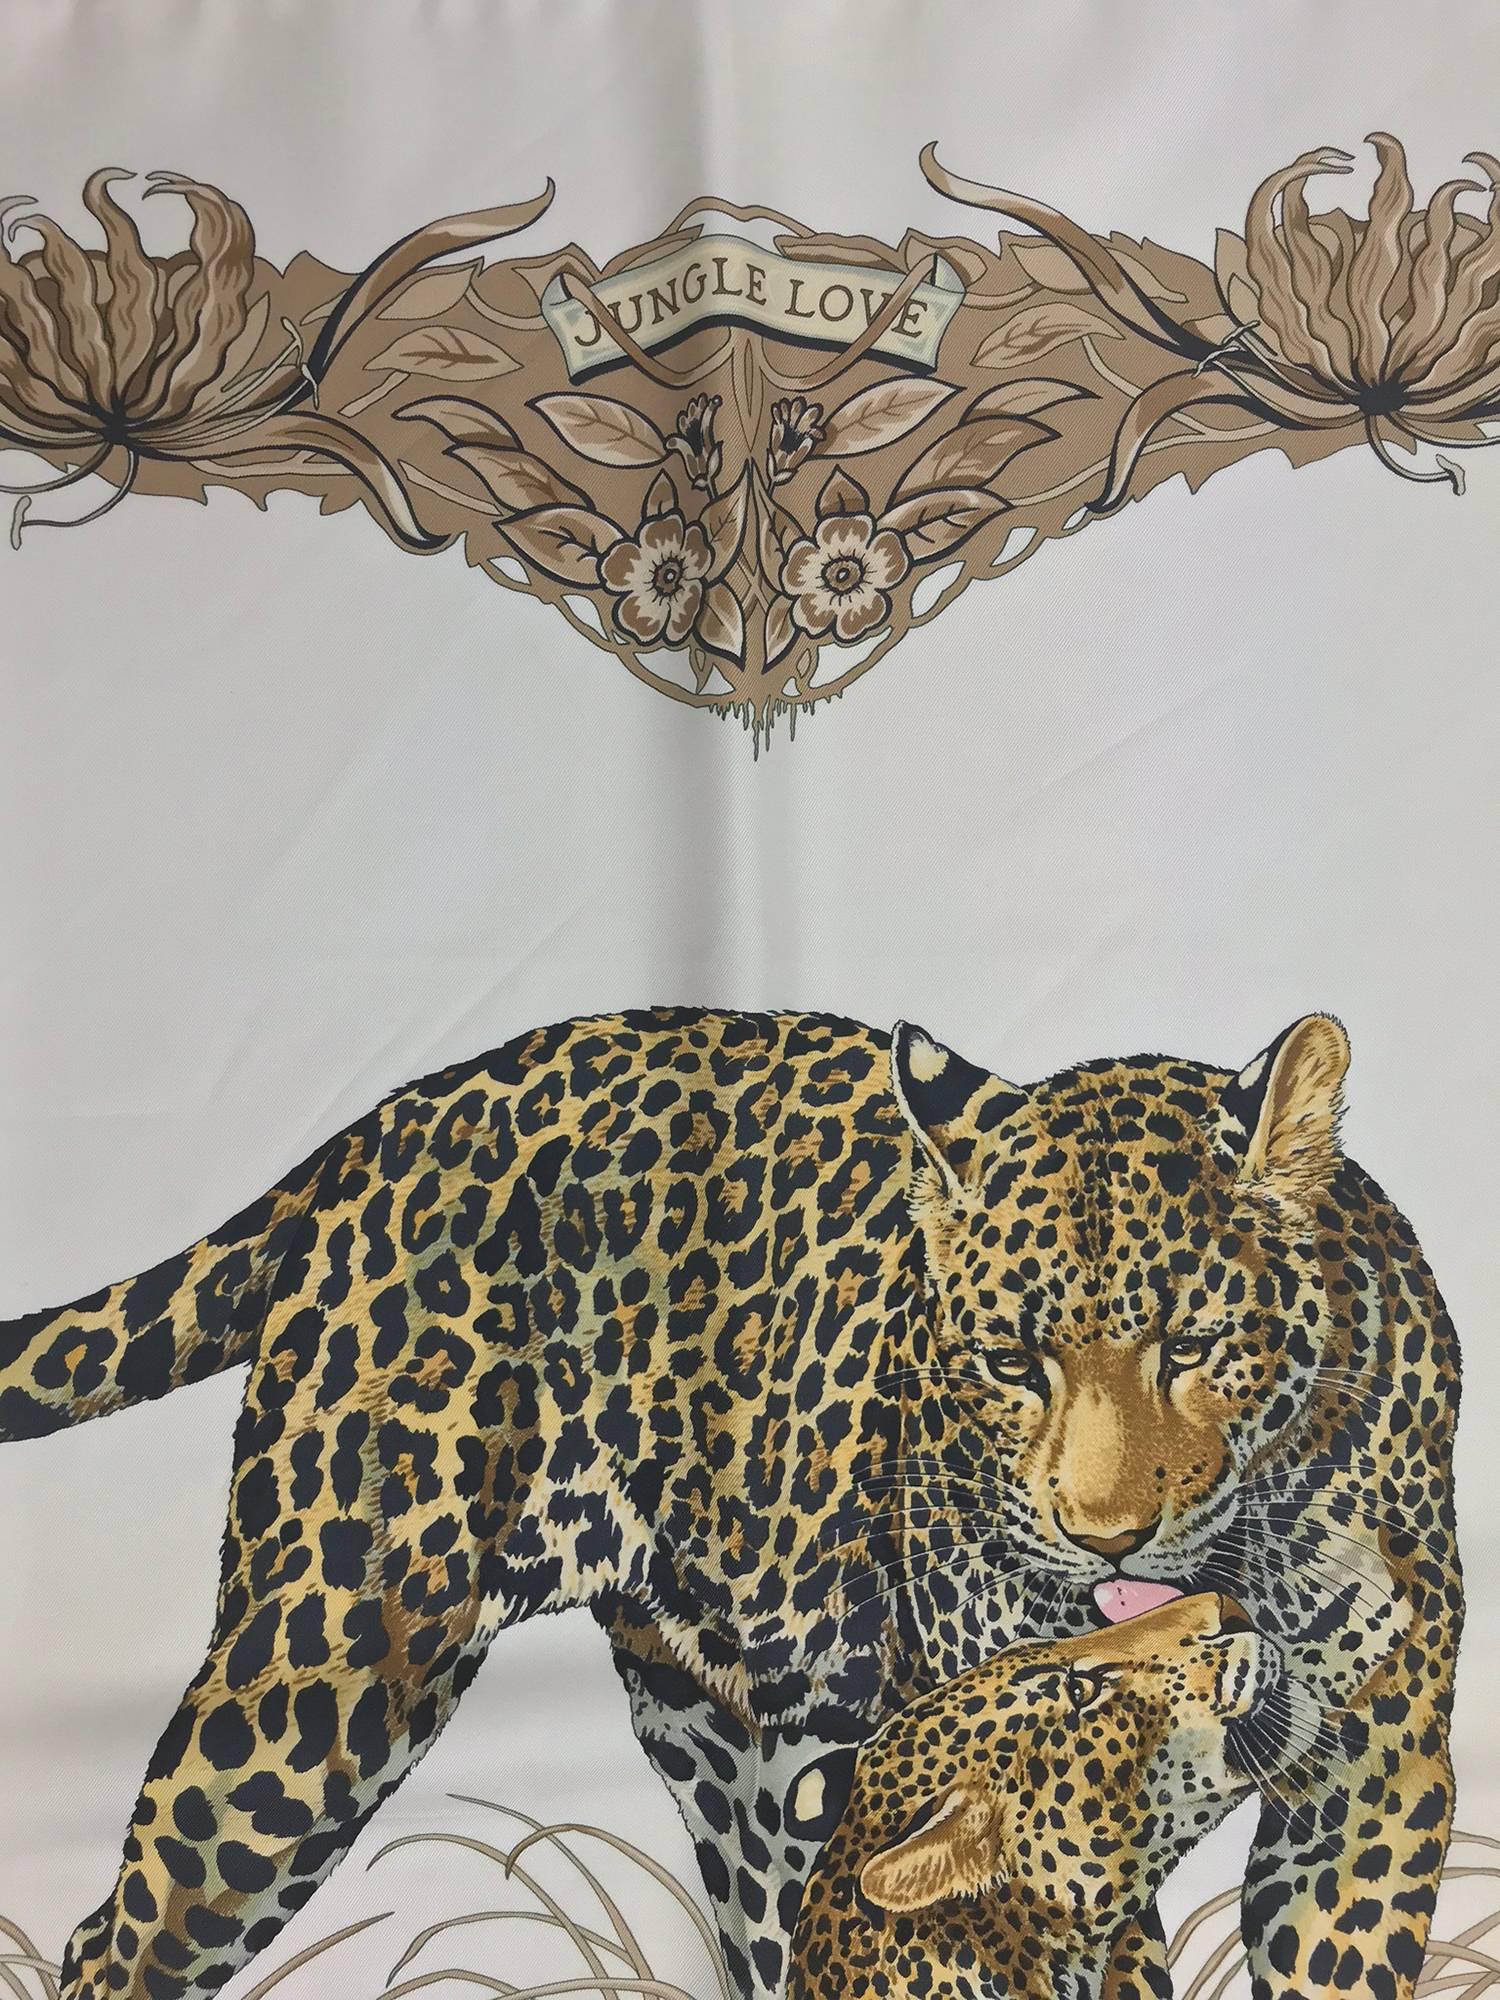 Hermes Jungle Love by Robert Dallet creamy white silk twill scarf 35" x 35" Beautifully illustrated, in excellent condition. Professionally dry cleaned.   